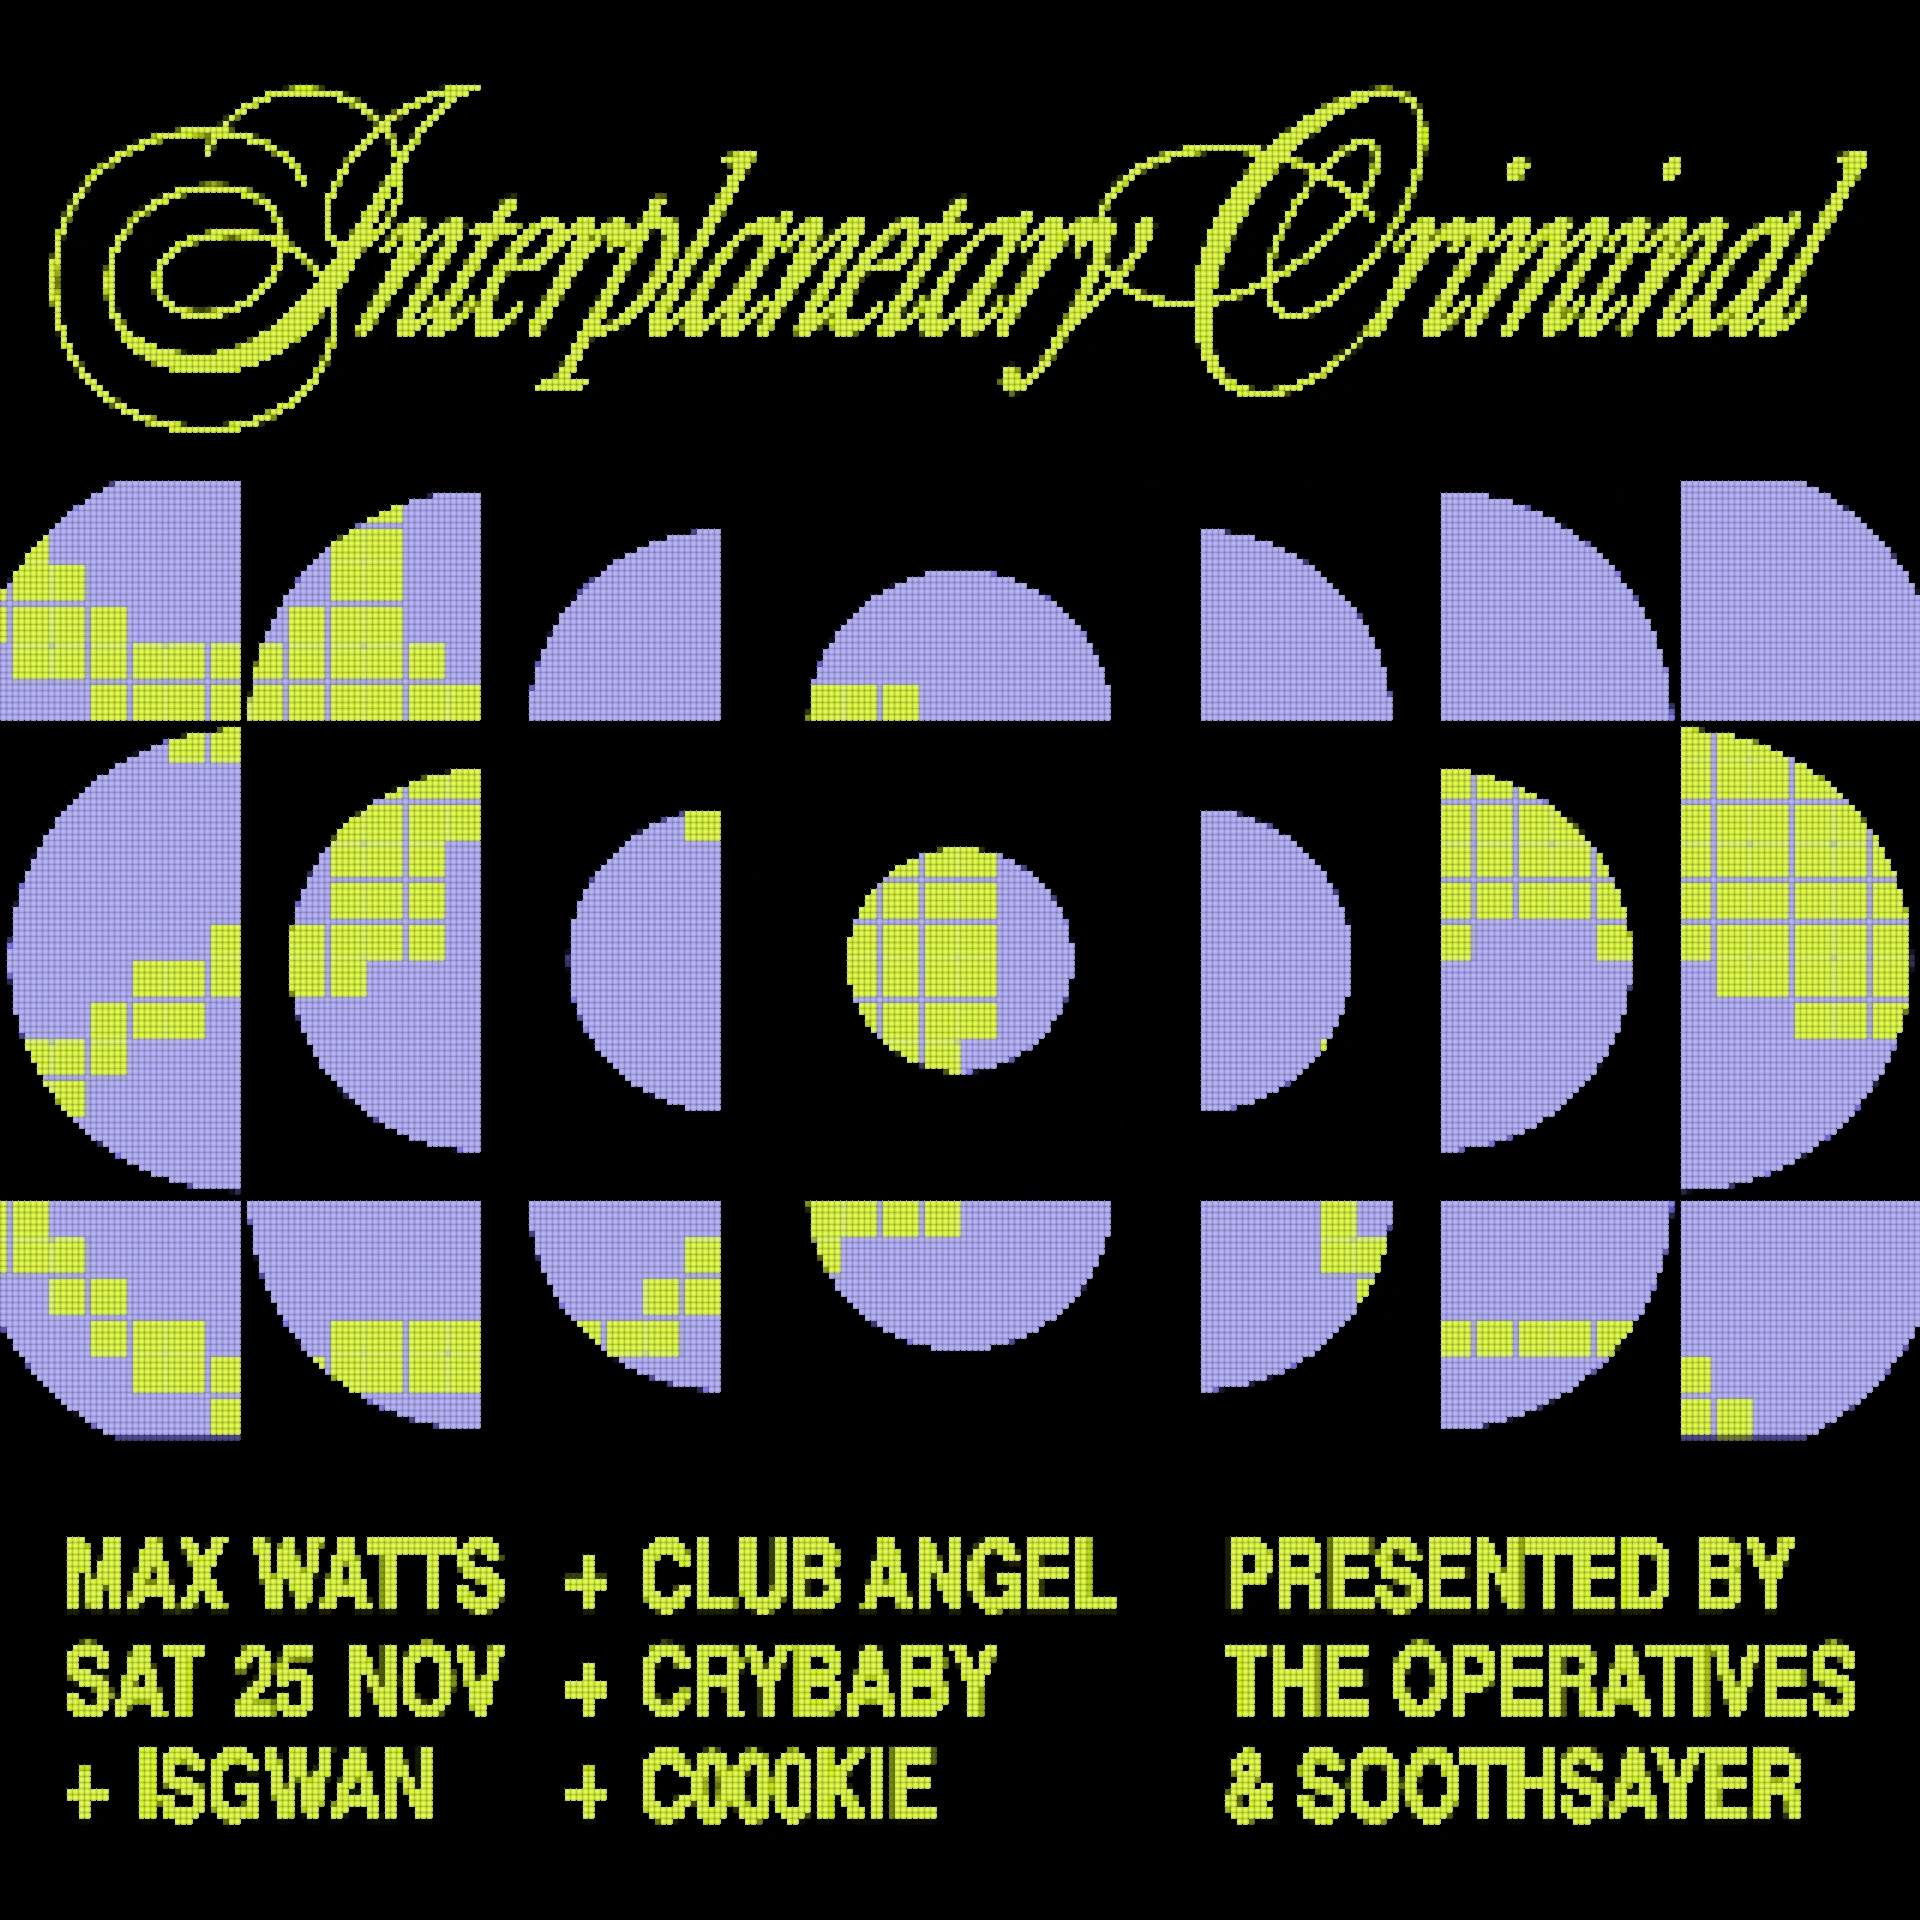 The Operatives & Soothsayer present: Interplanetary Criminal - フライヤー表